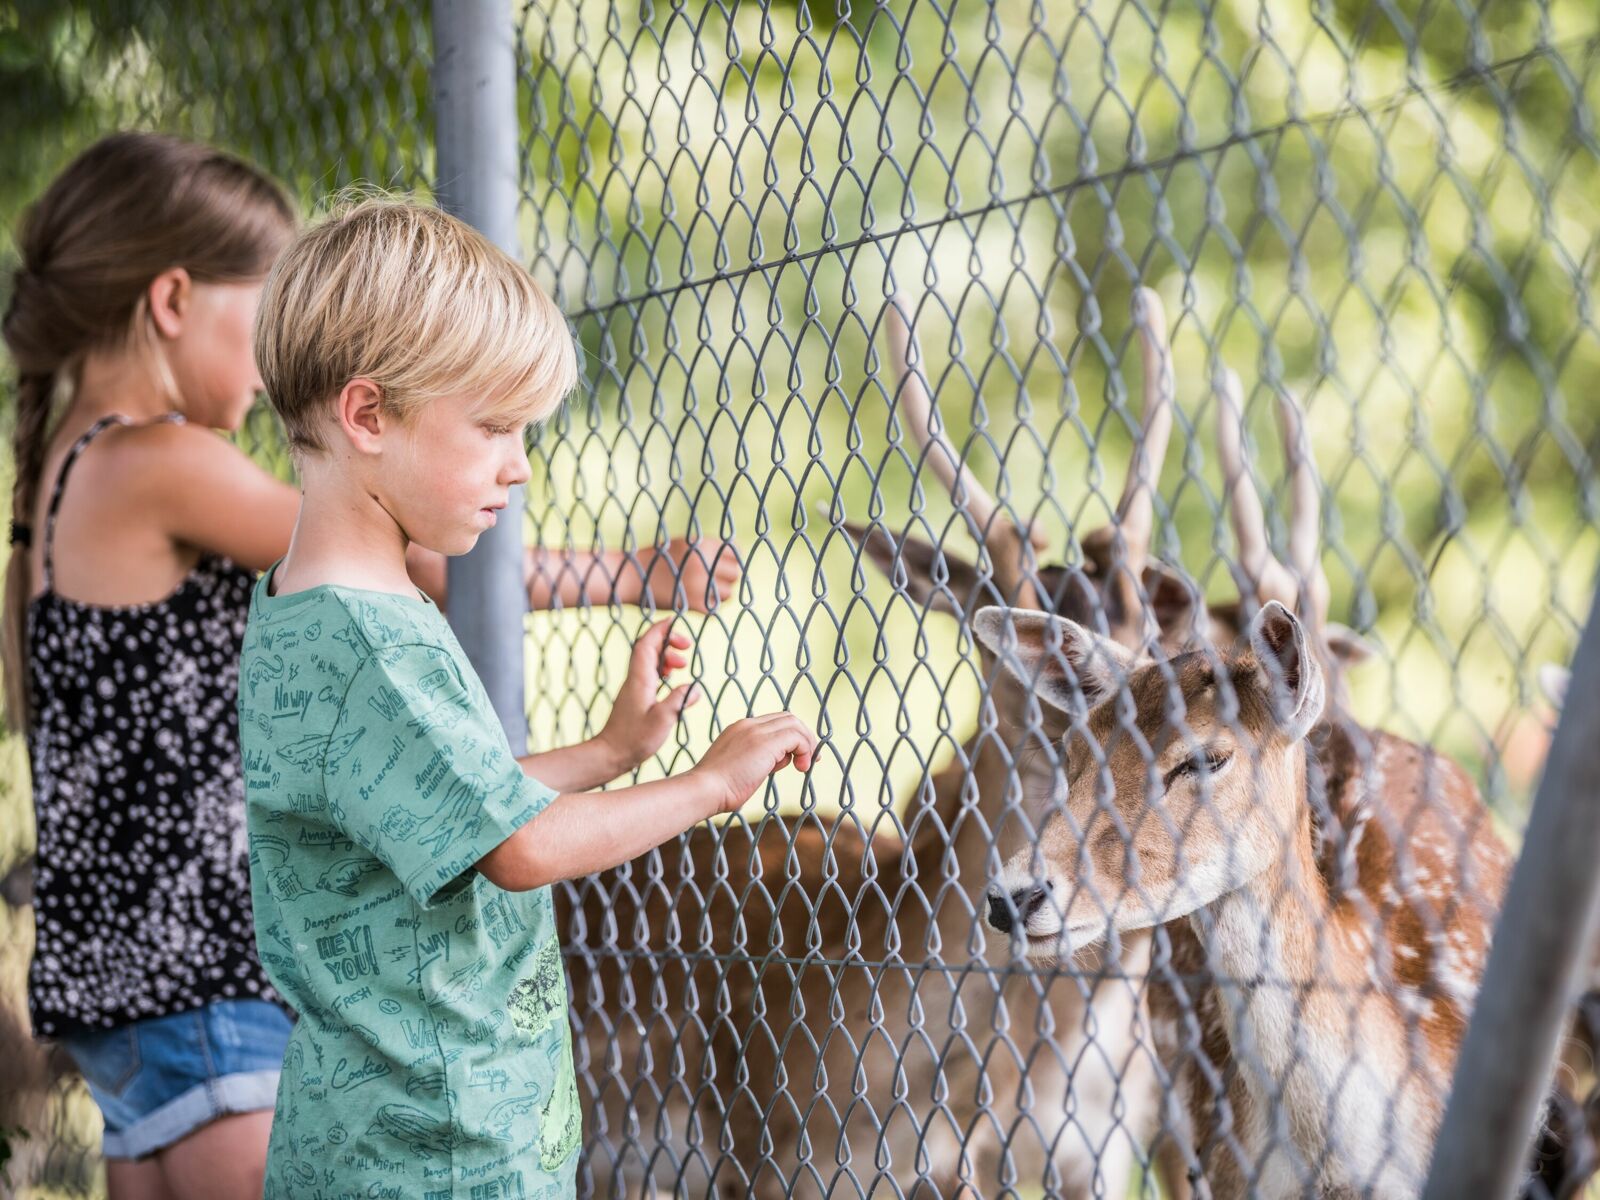 Experience animals up close in the Wildpark Peter & Paul in St.Gallen